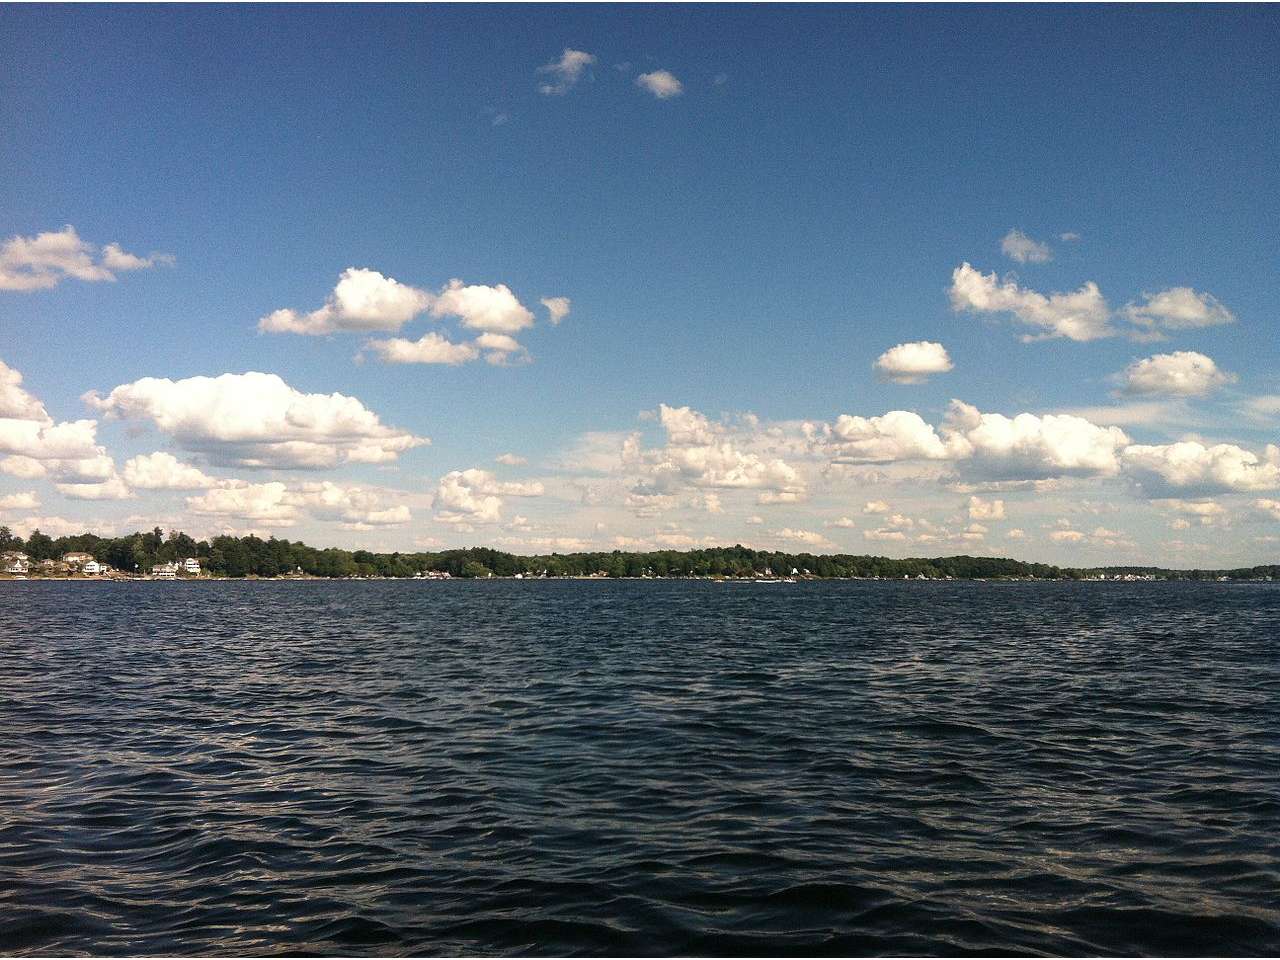 Conneaut Lake - the largest natural and deepest lake in Pennsylvania